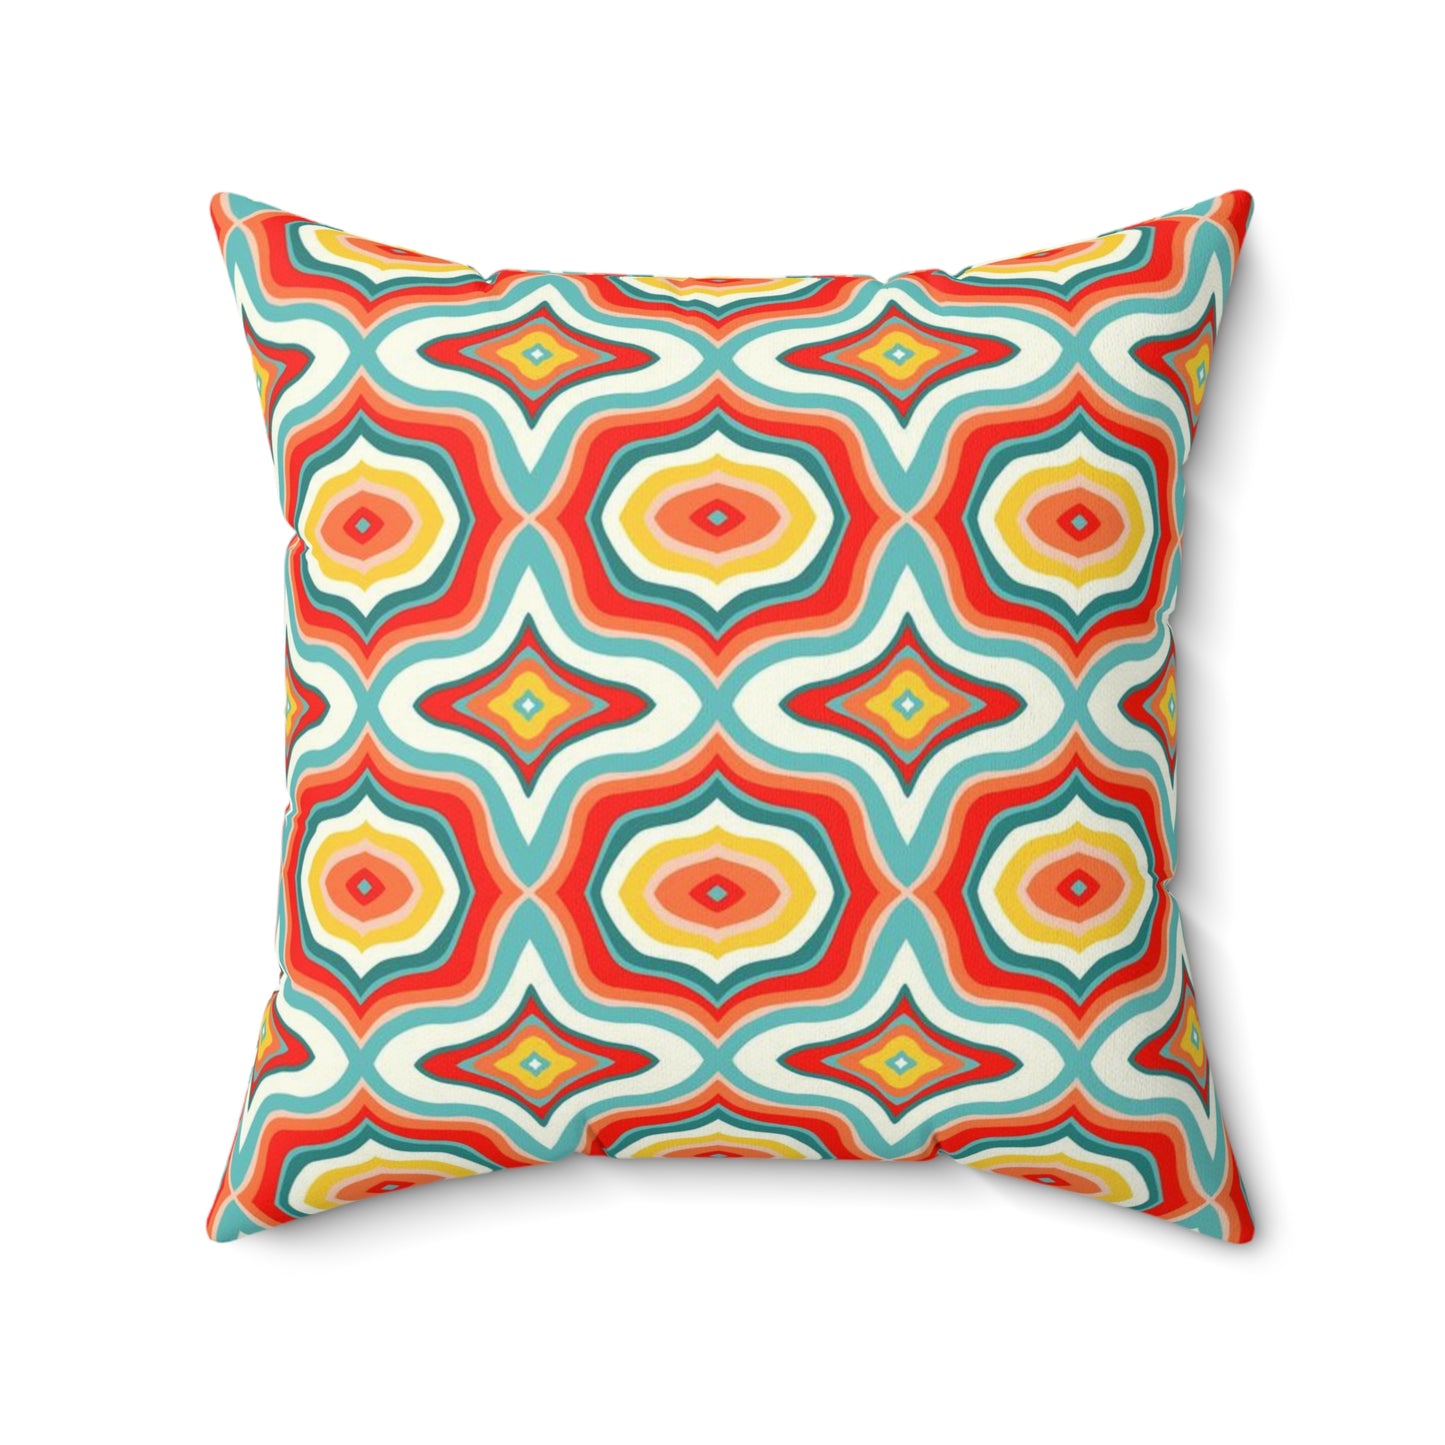 Groovy Waves Spun Polyester Square Pillow